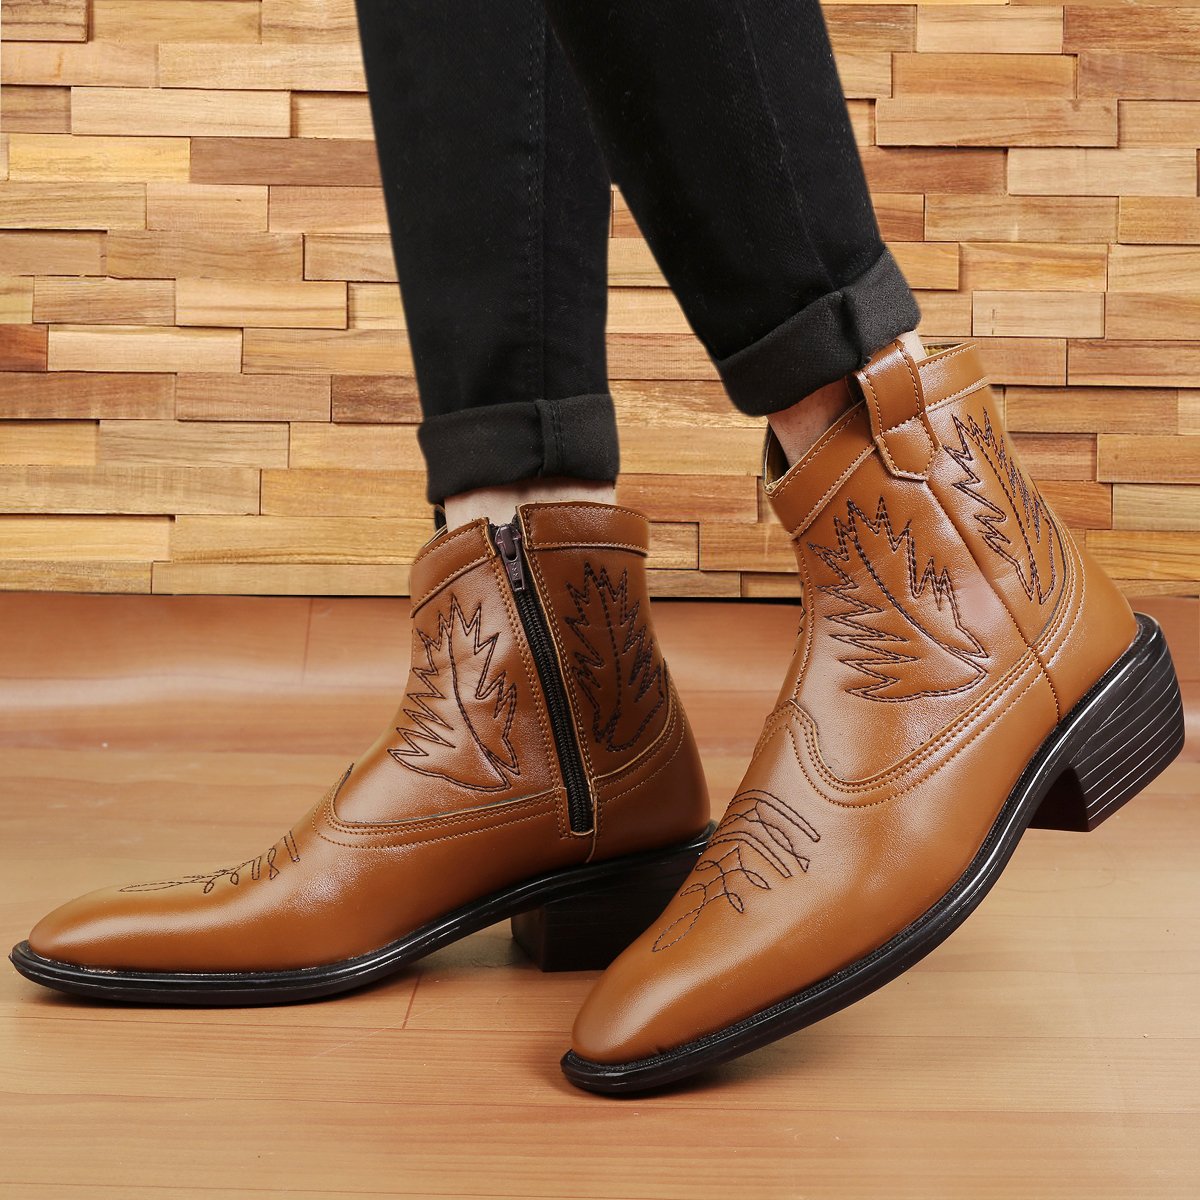 Jack Marc Men's Formal and Casual Retro Tan Boots for all seasons